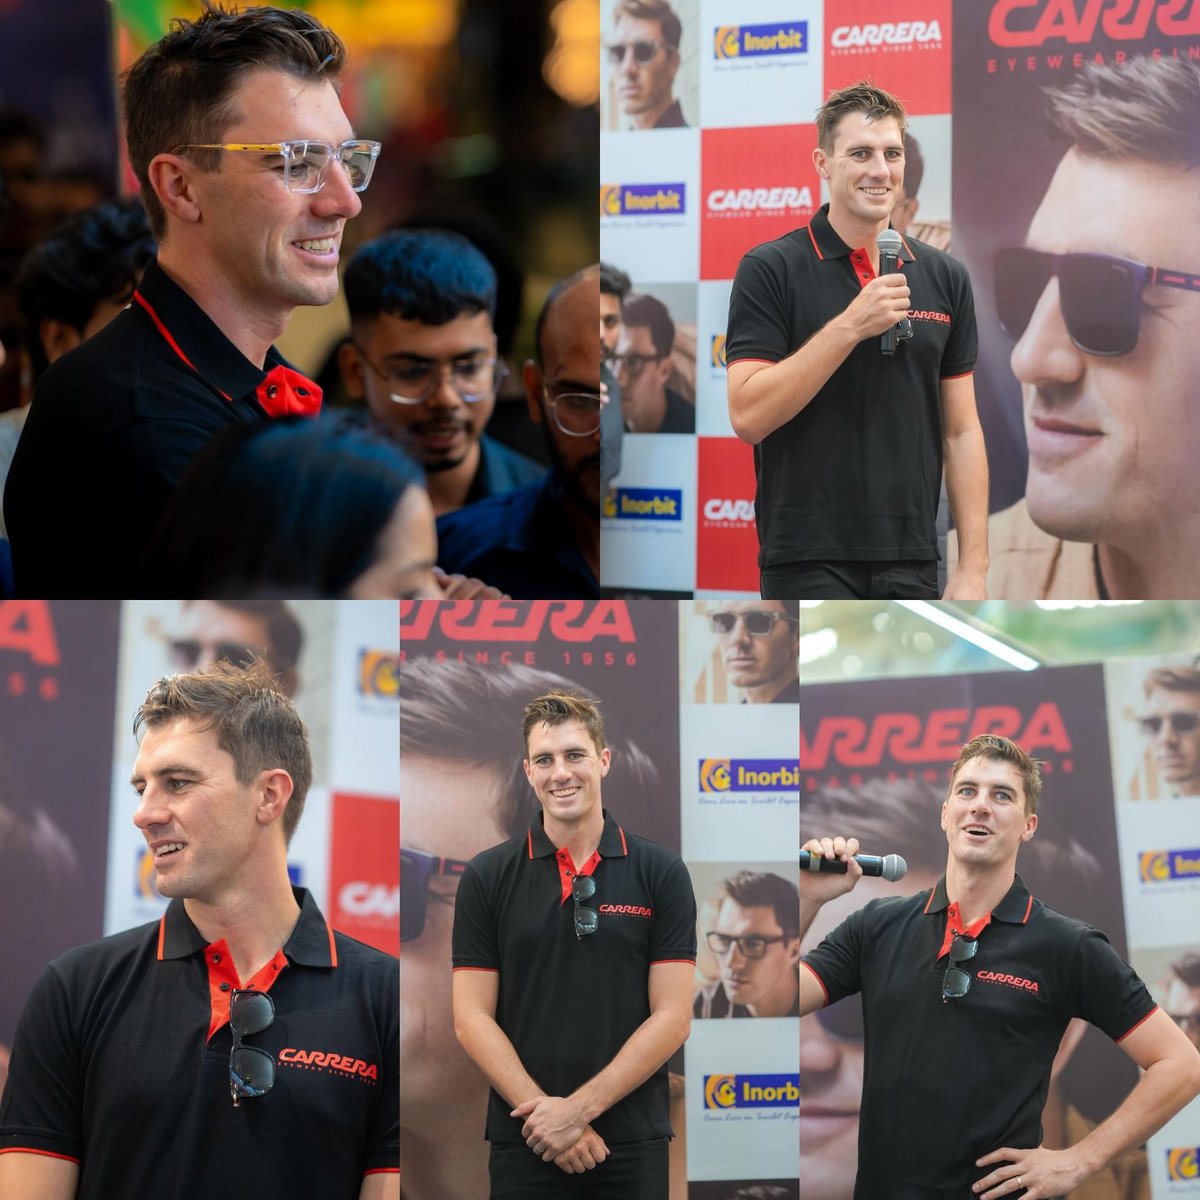 More Images of Pat Cummins From Inorbit Mall Promotional Event!